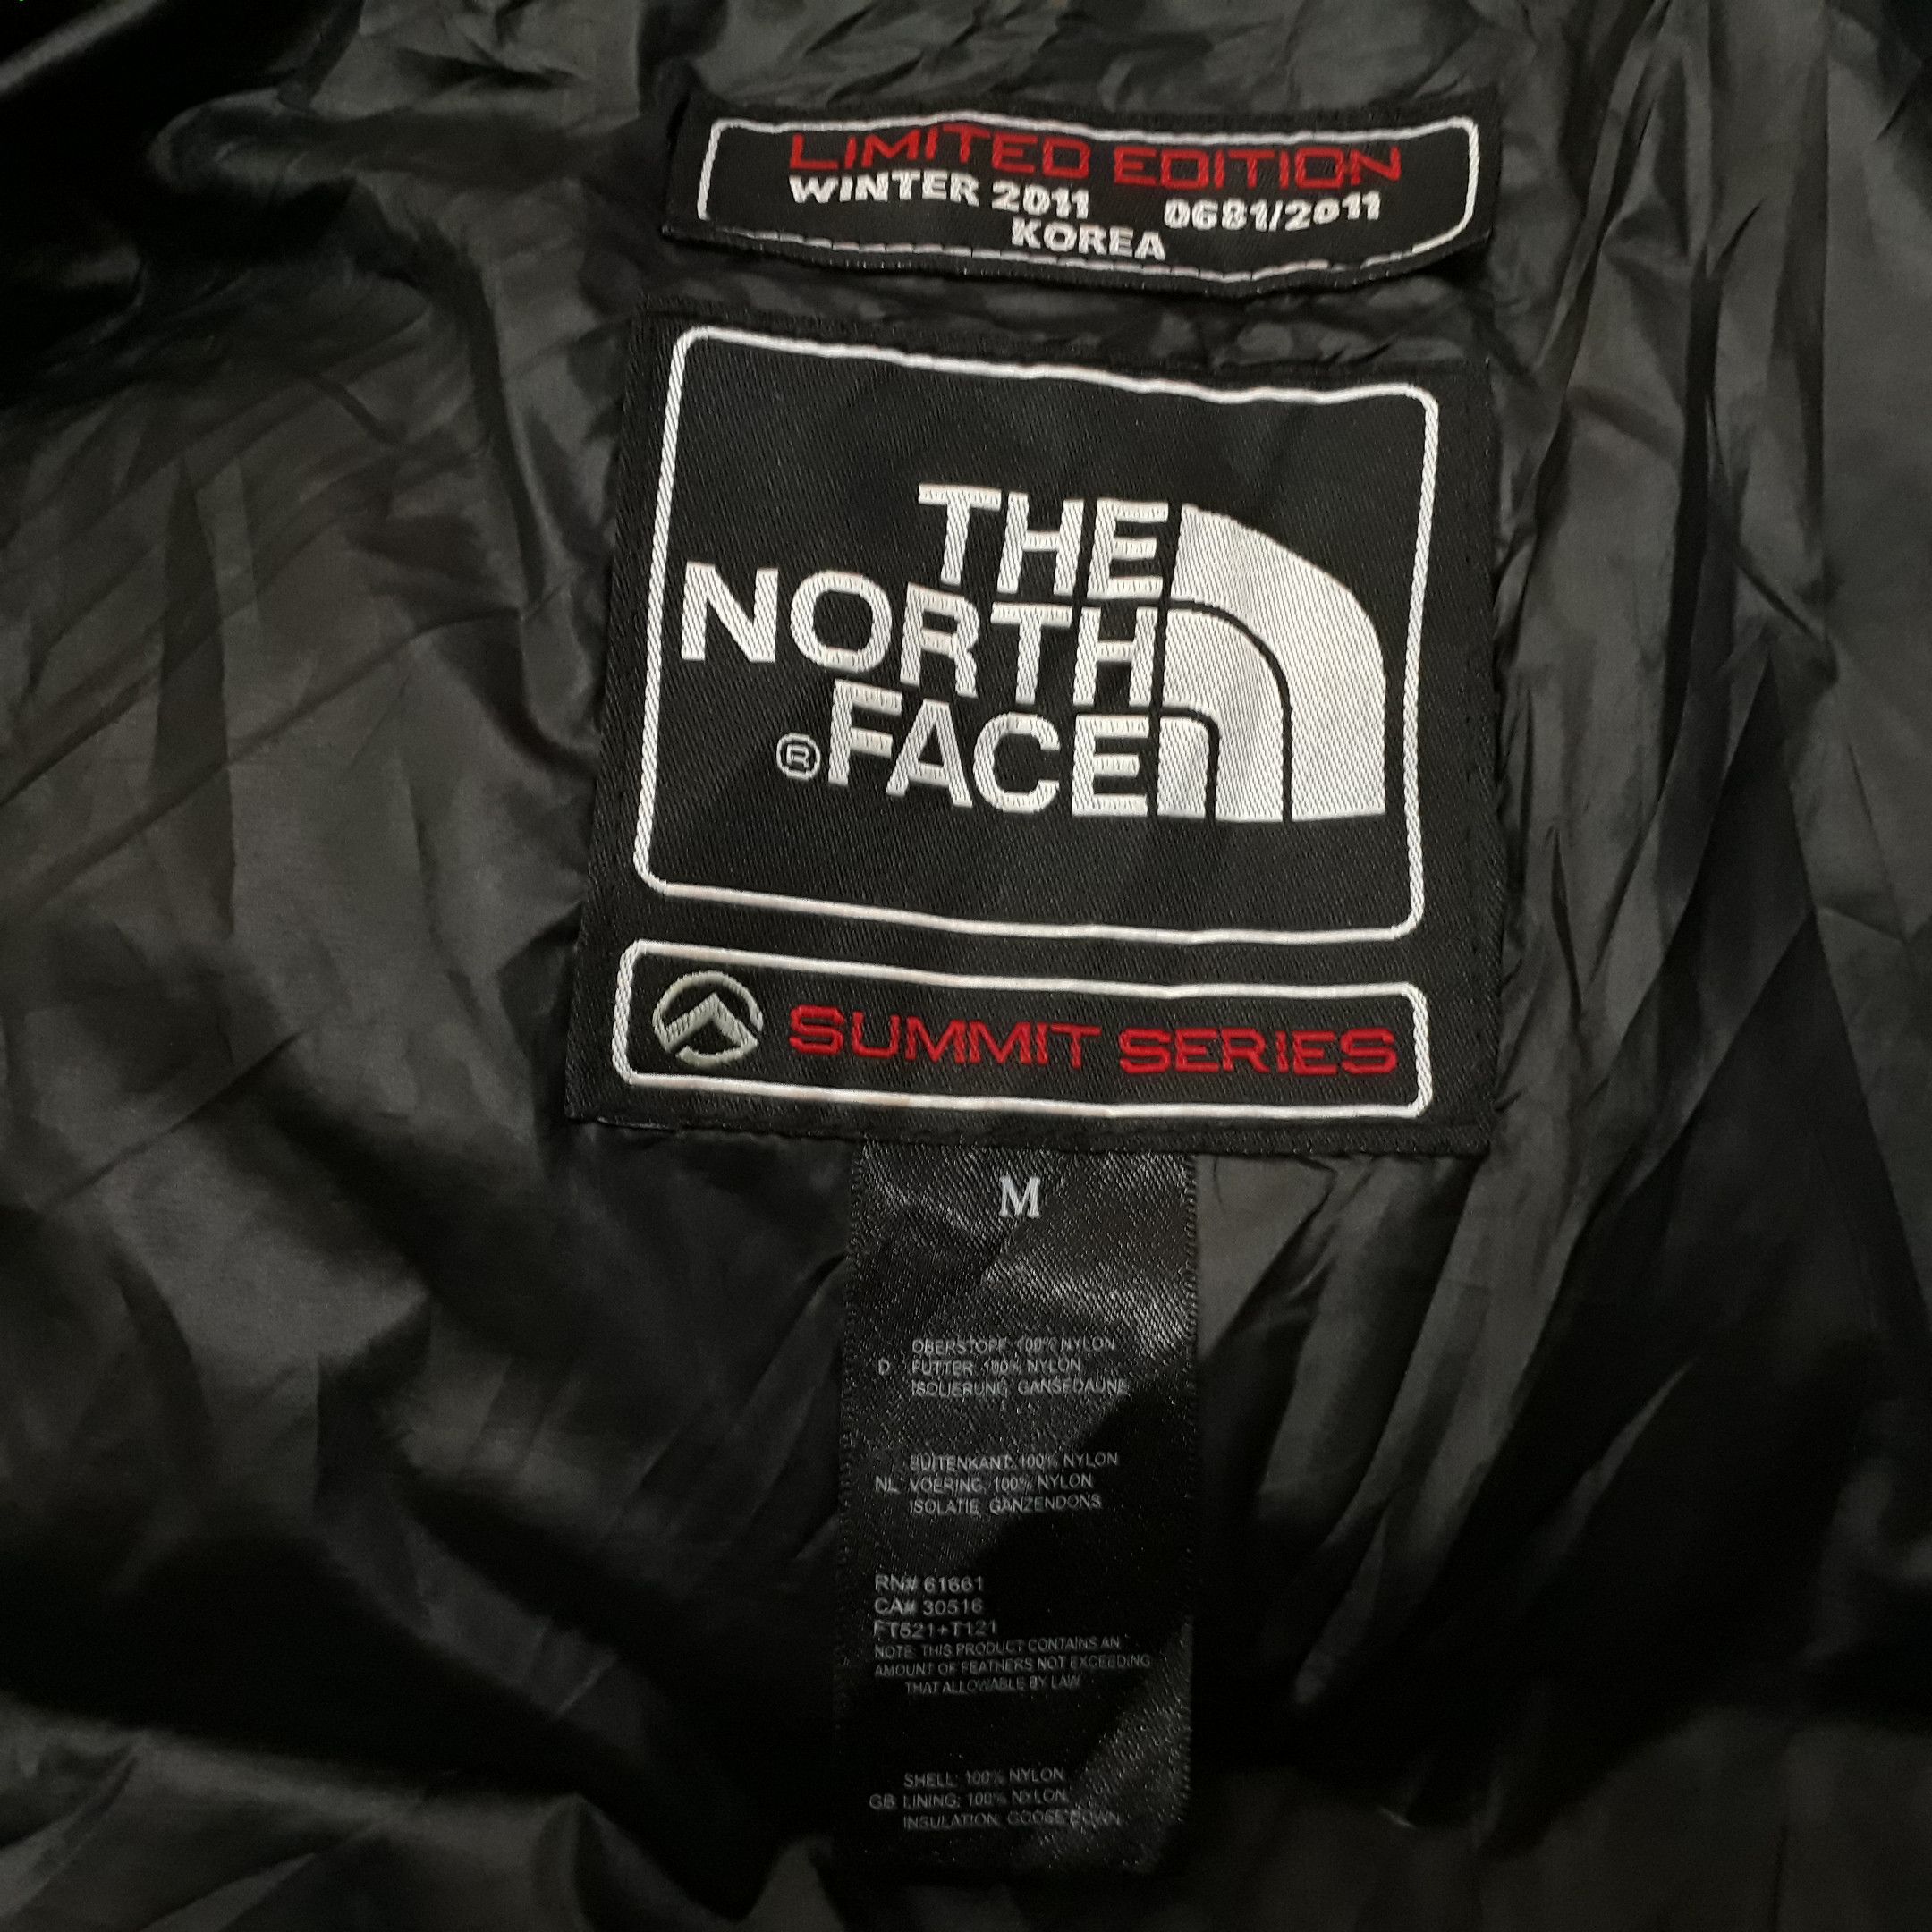 The North Face The North Face Limited Edition Winter 2011 Goose Down Summit Series 850Ltd Puffer Quilted Bomber Jacket Hoodie Size US M / EU 48-50 / 2 - 5 Thumbnail